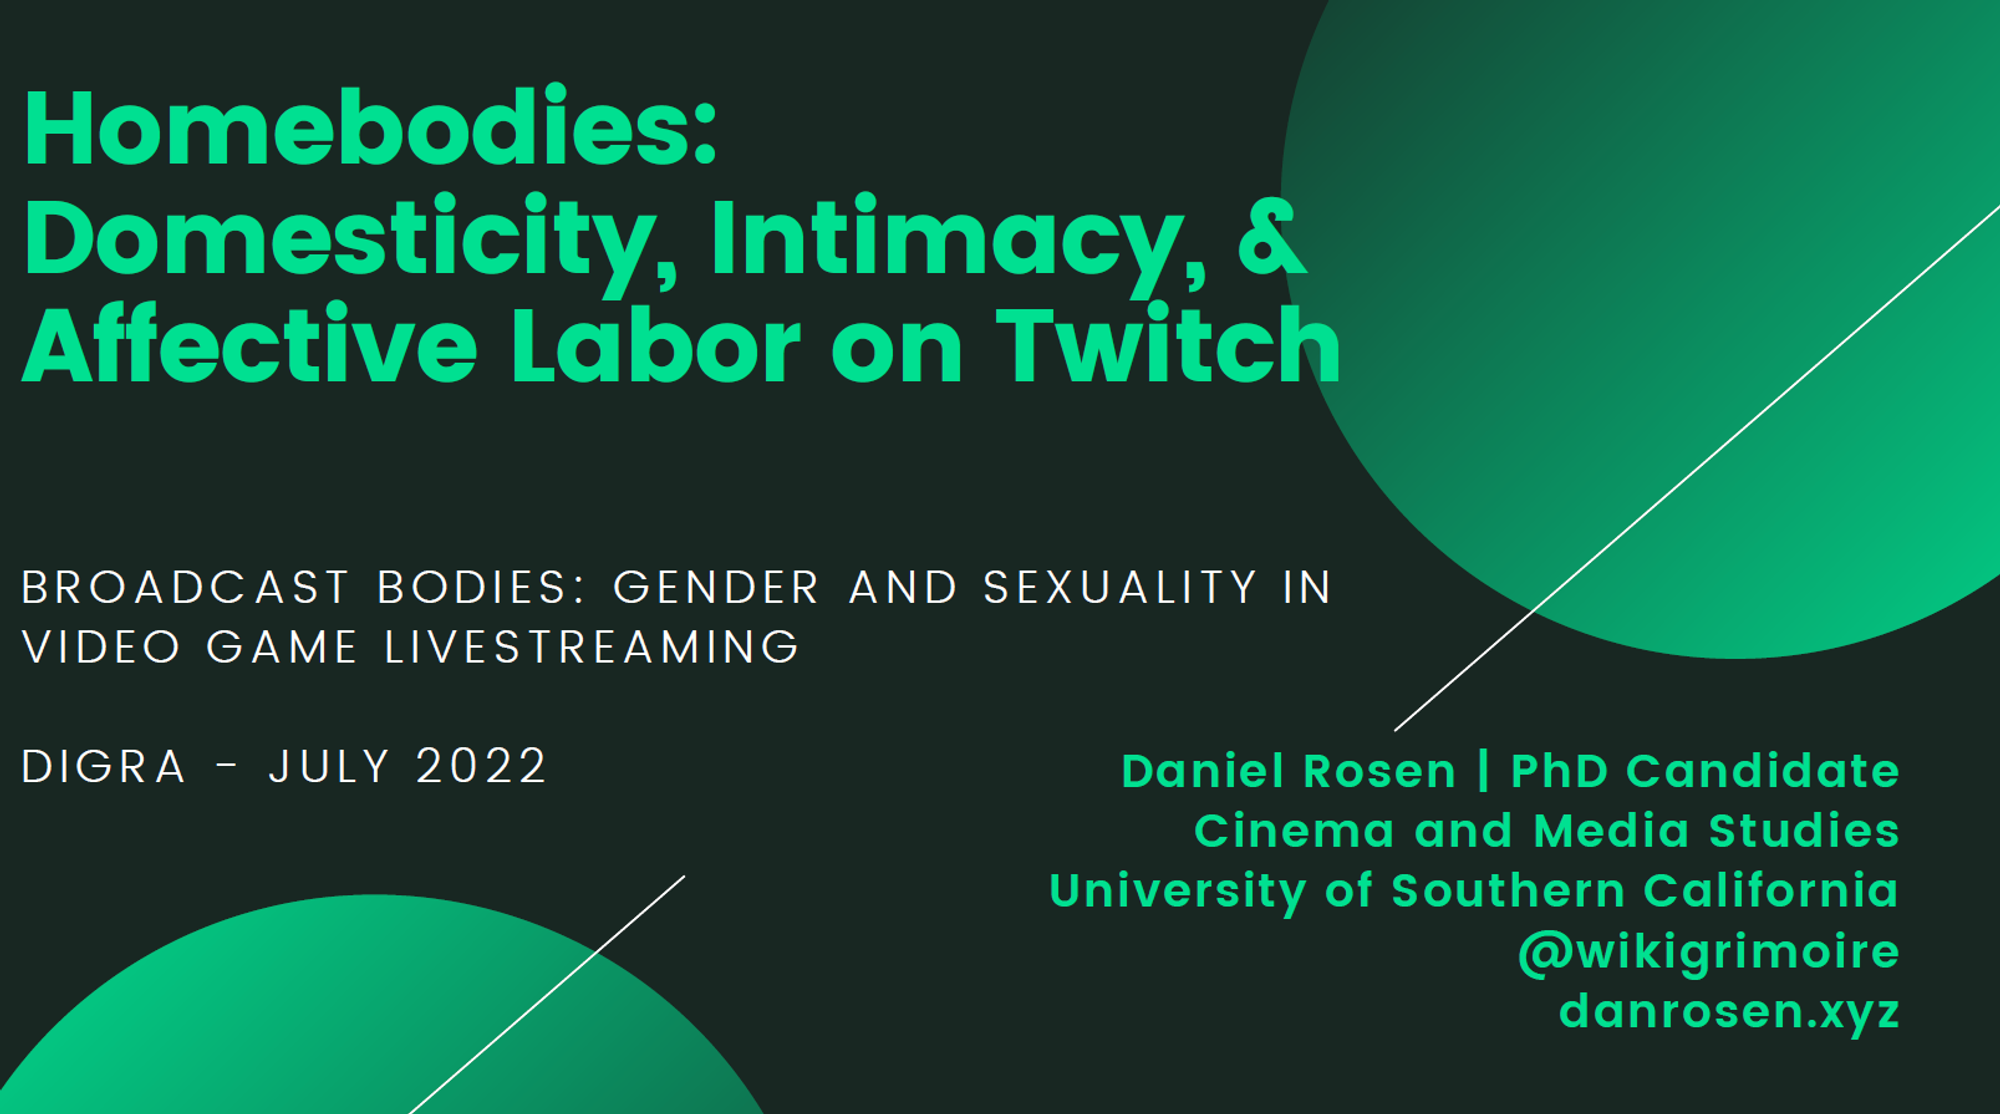 Homebodies: Domesticity, Intimacy, and Affective Labor on Twitch